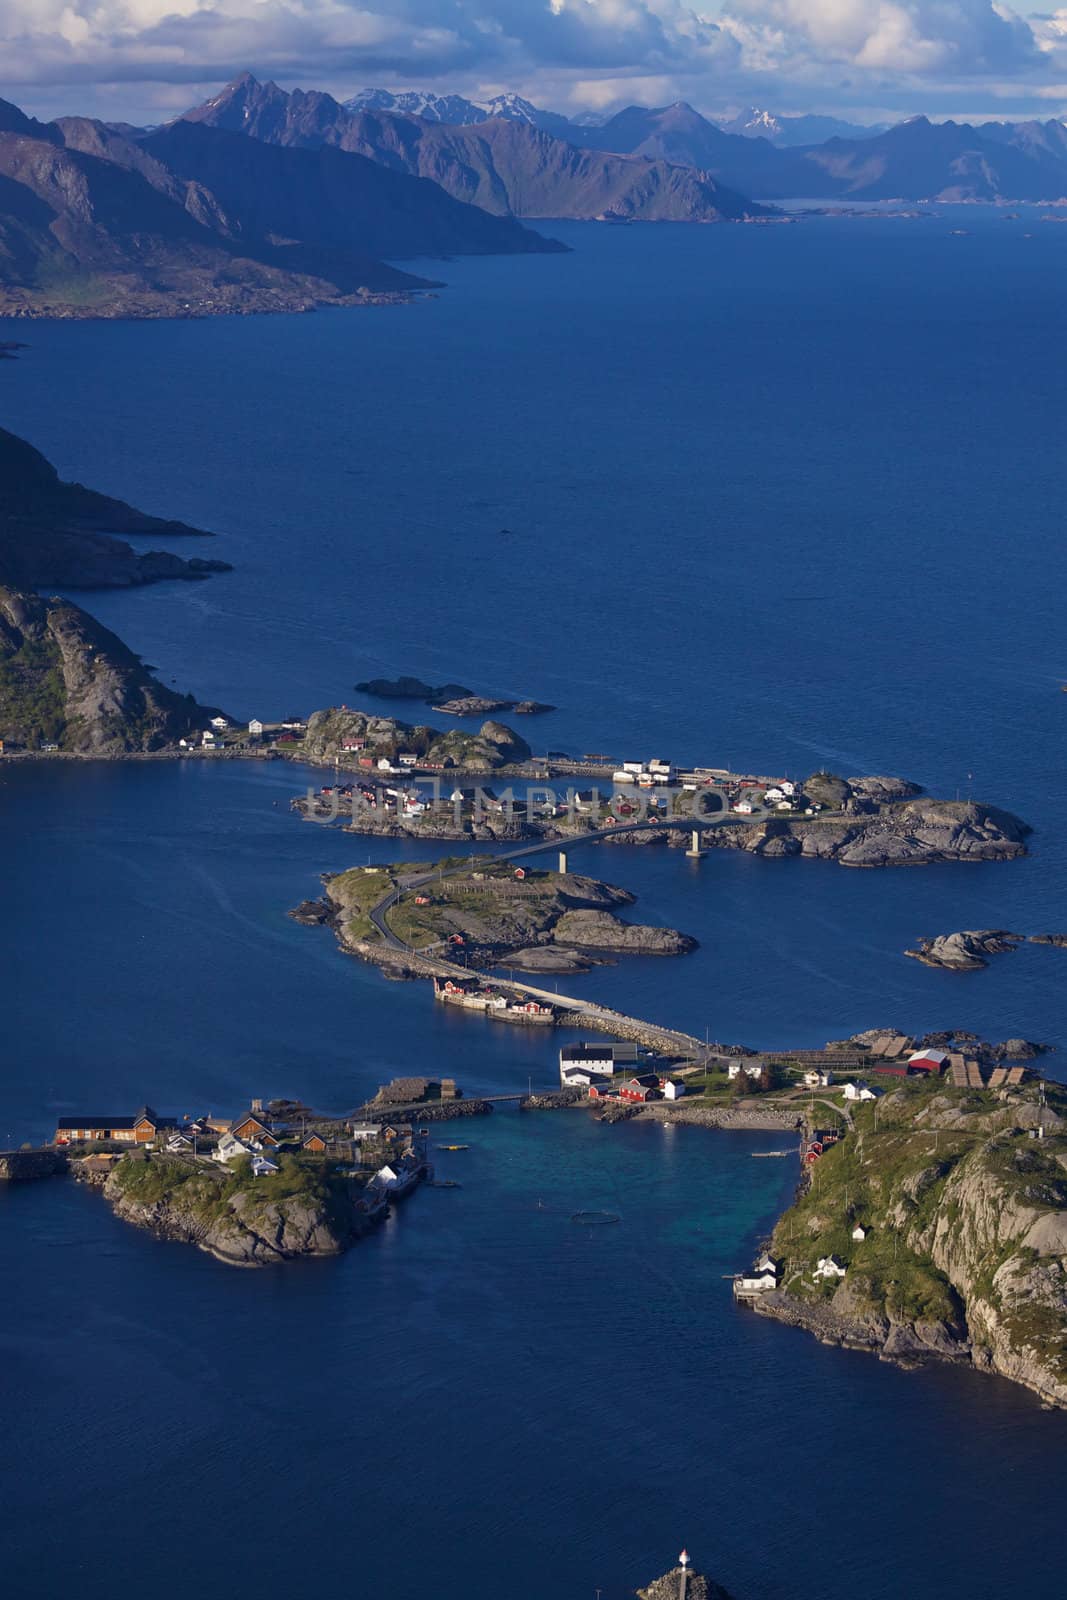 Picturesque view from Reinebringen with small fishing villages on tiny islands connected by bridges